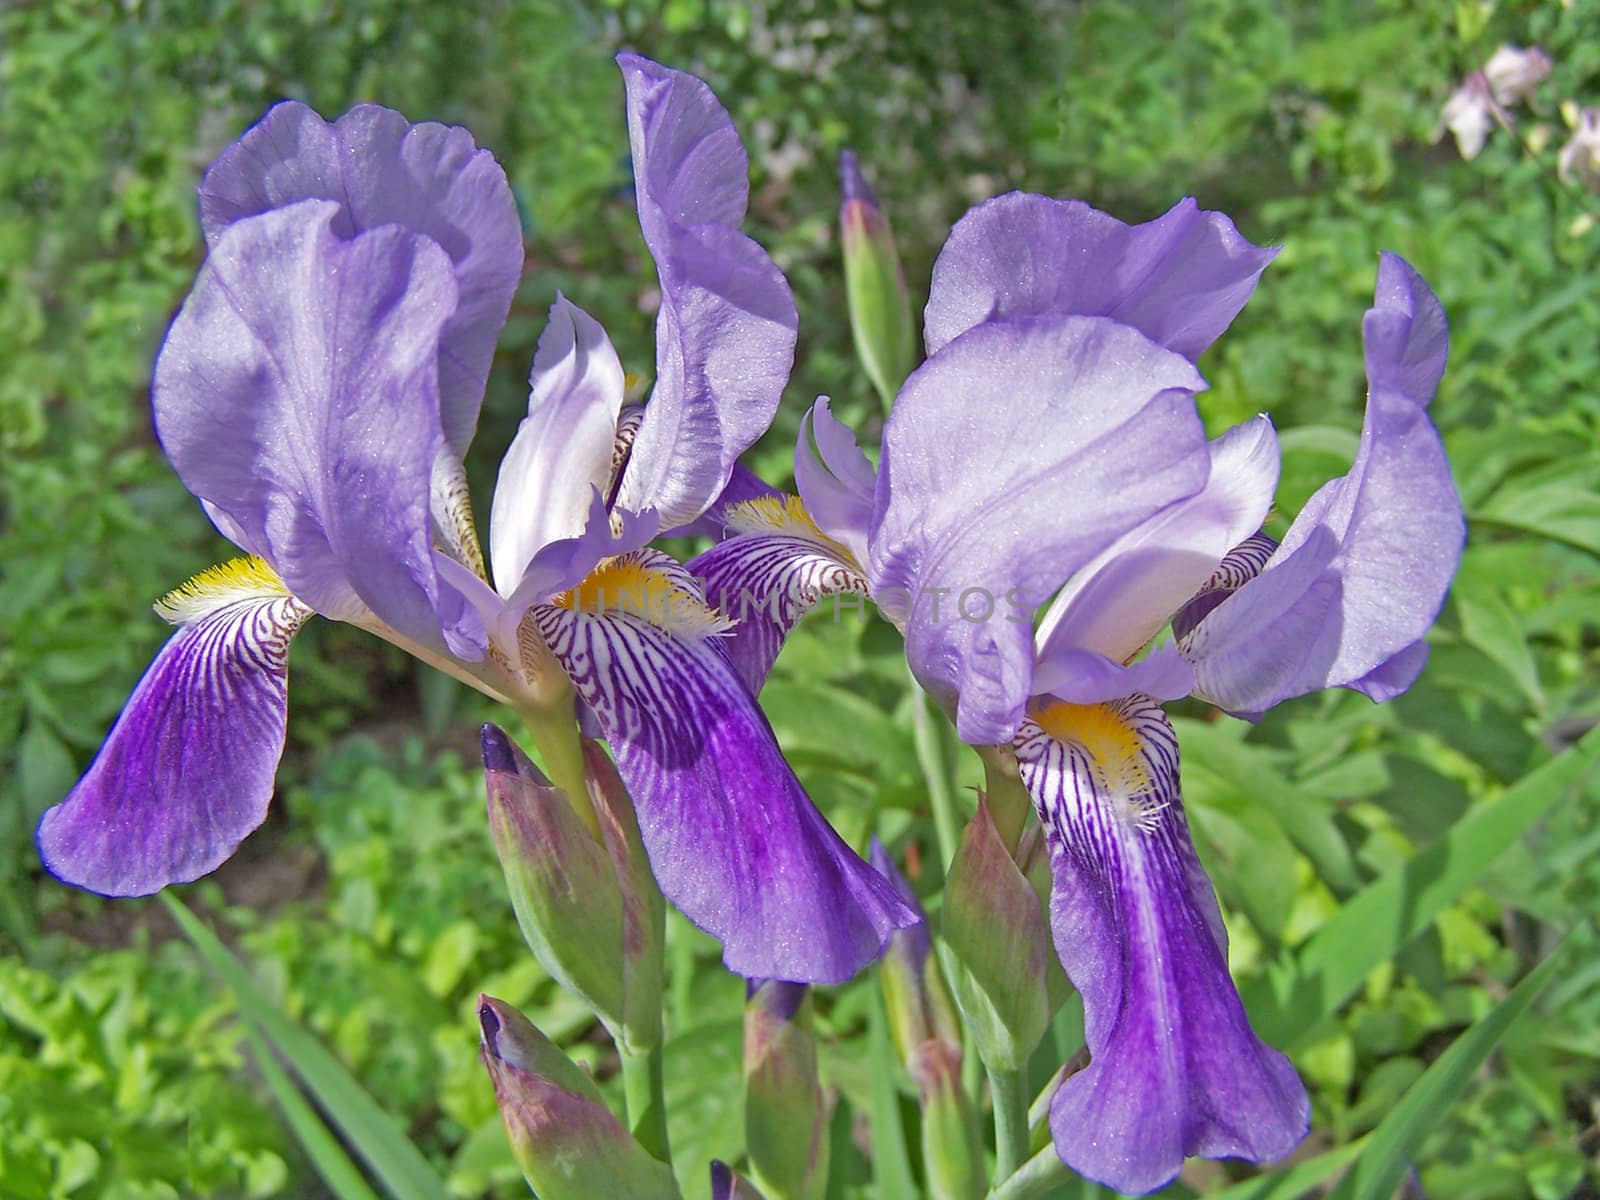 Close up of the iris flowers and buds.